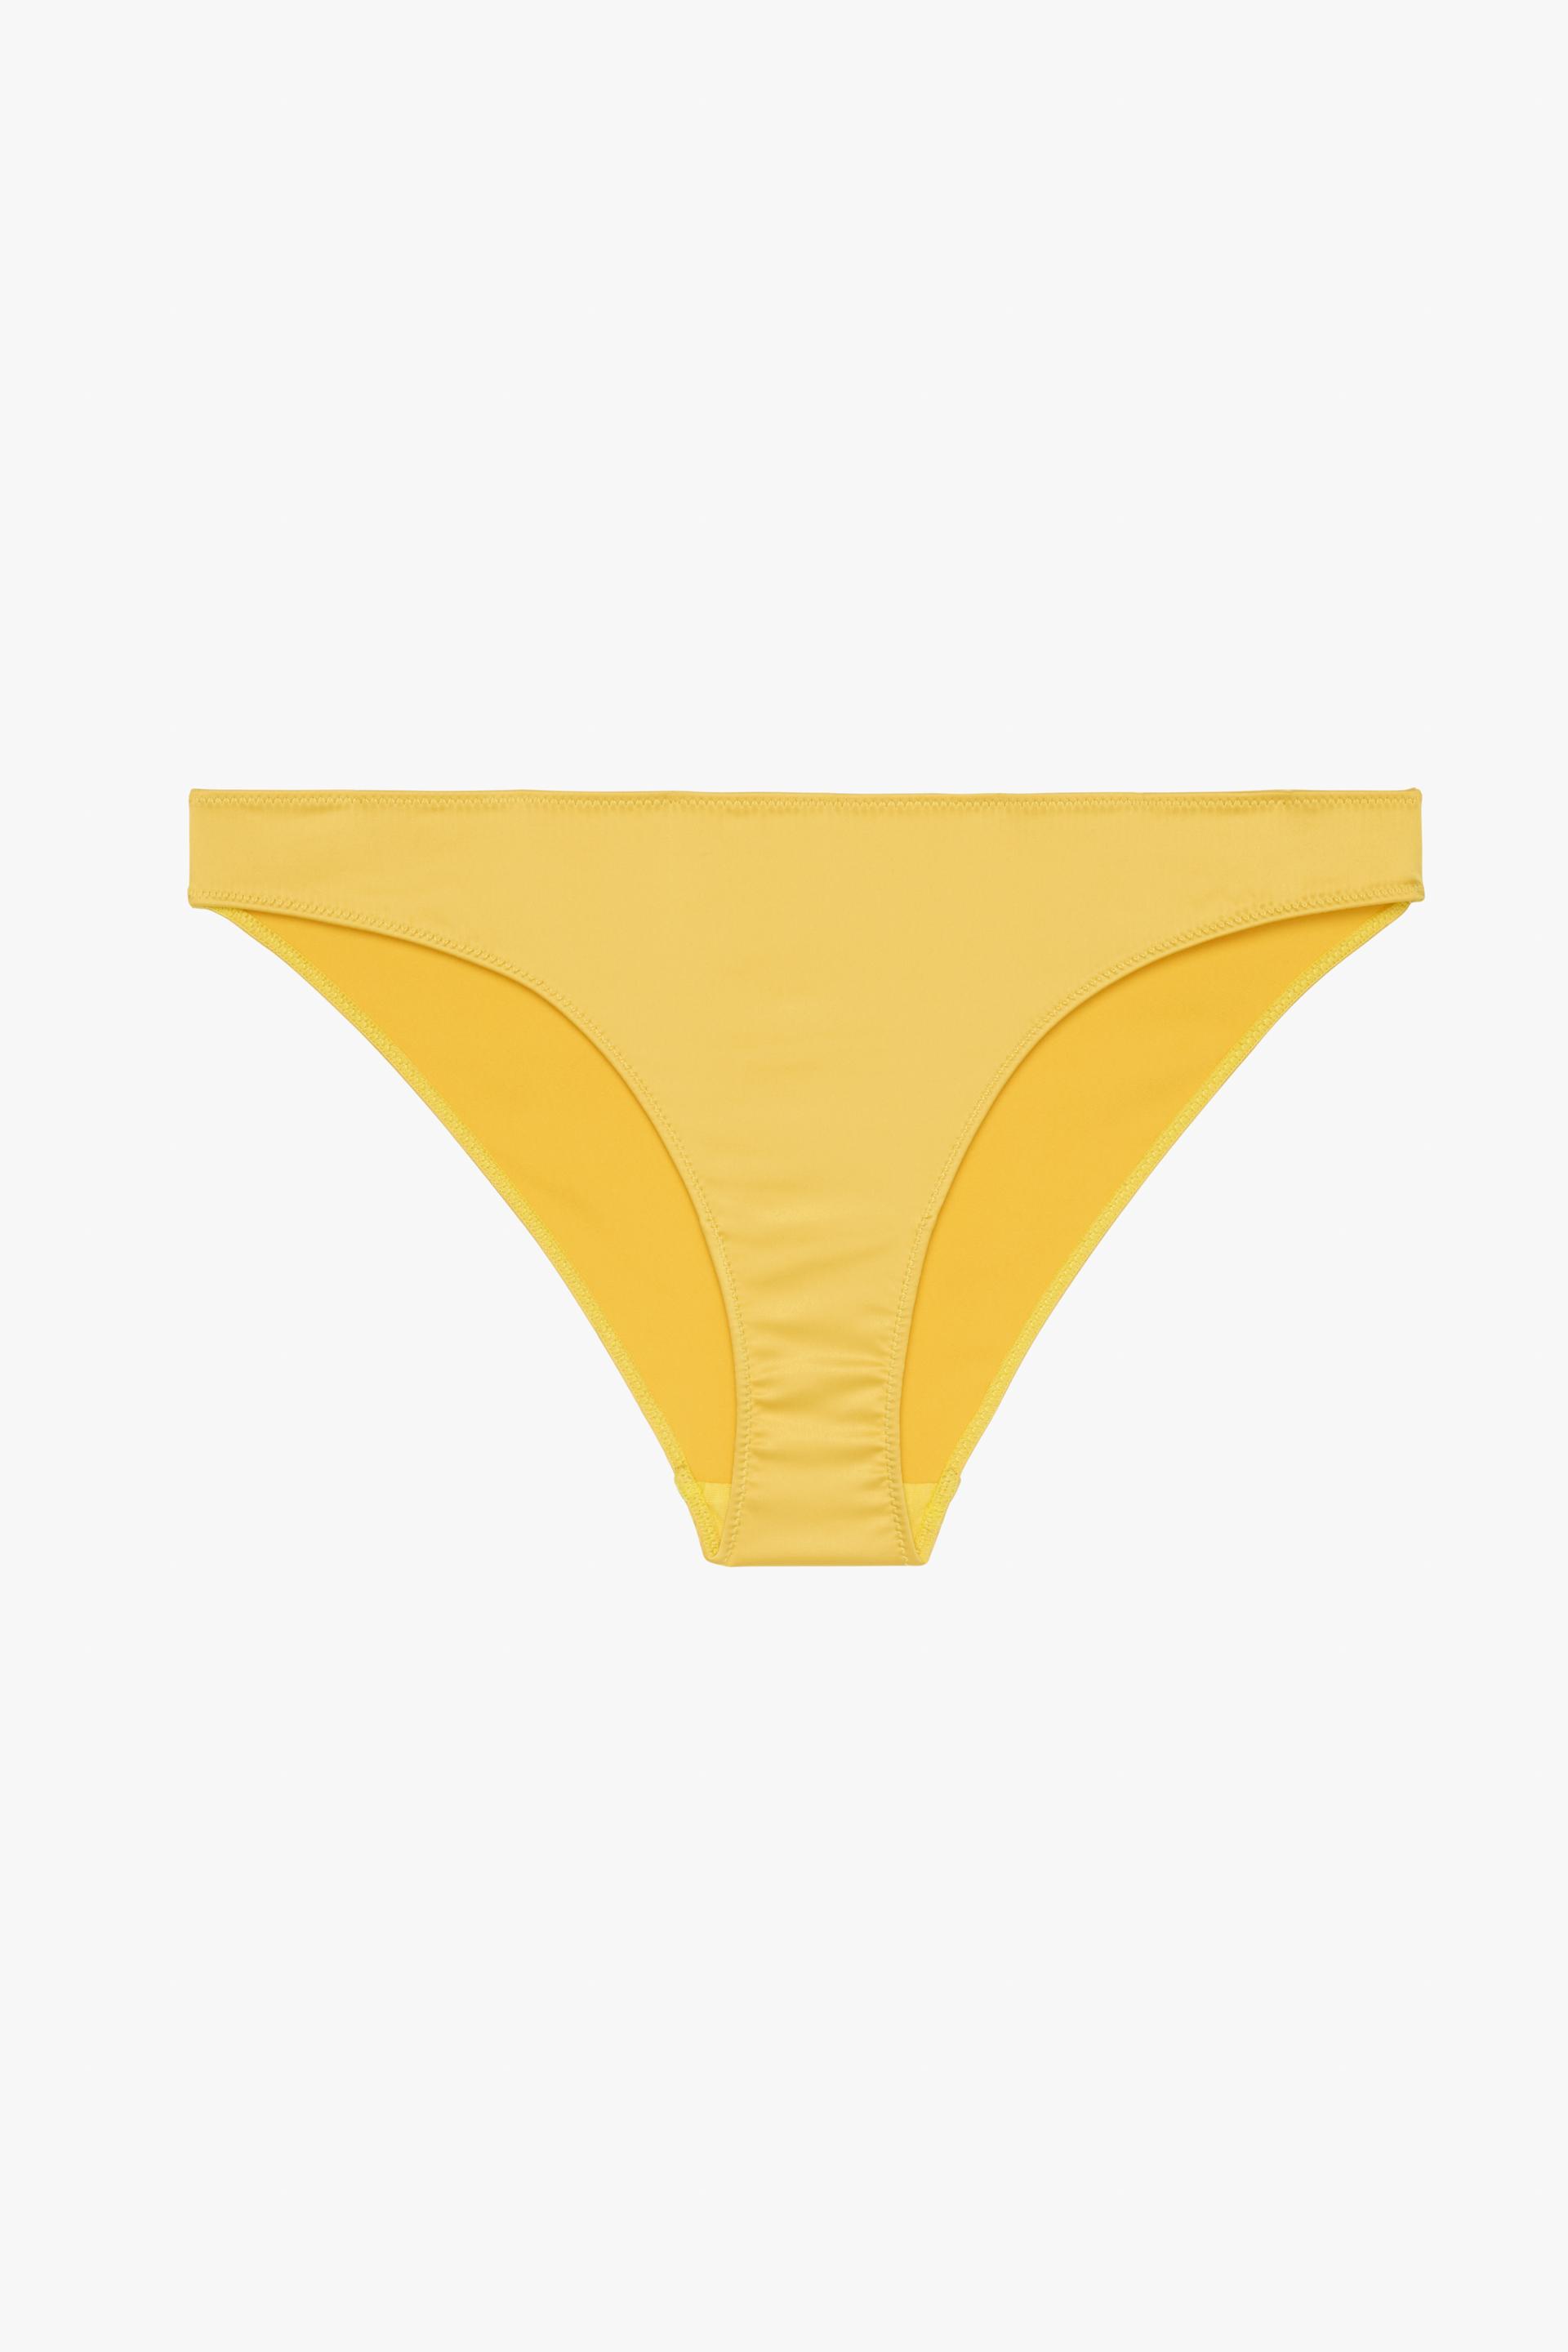 SATIN EFFECT PANTIES LIMITED EDITION - Yellow